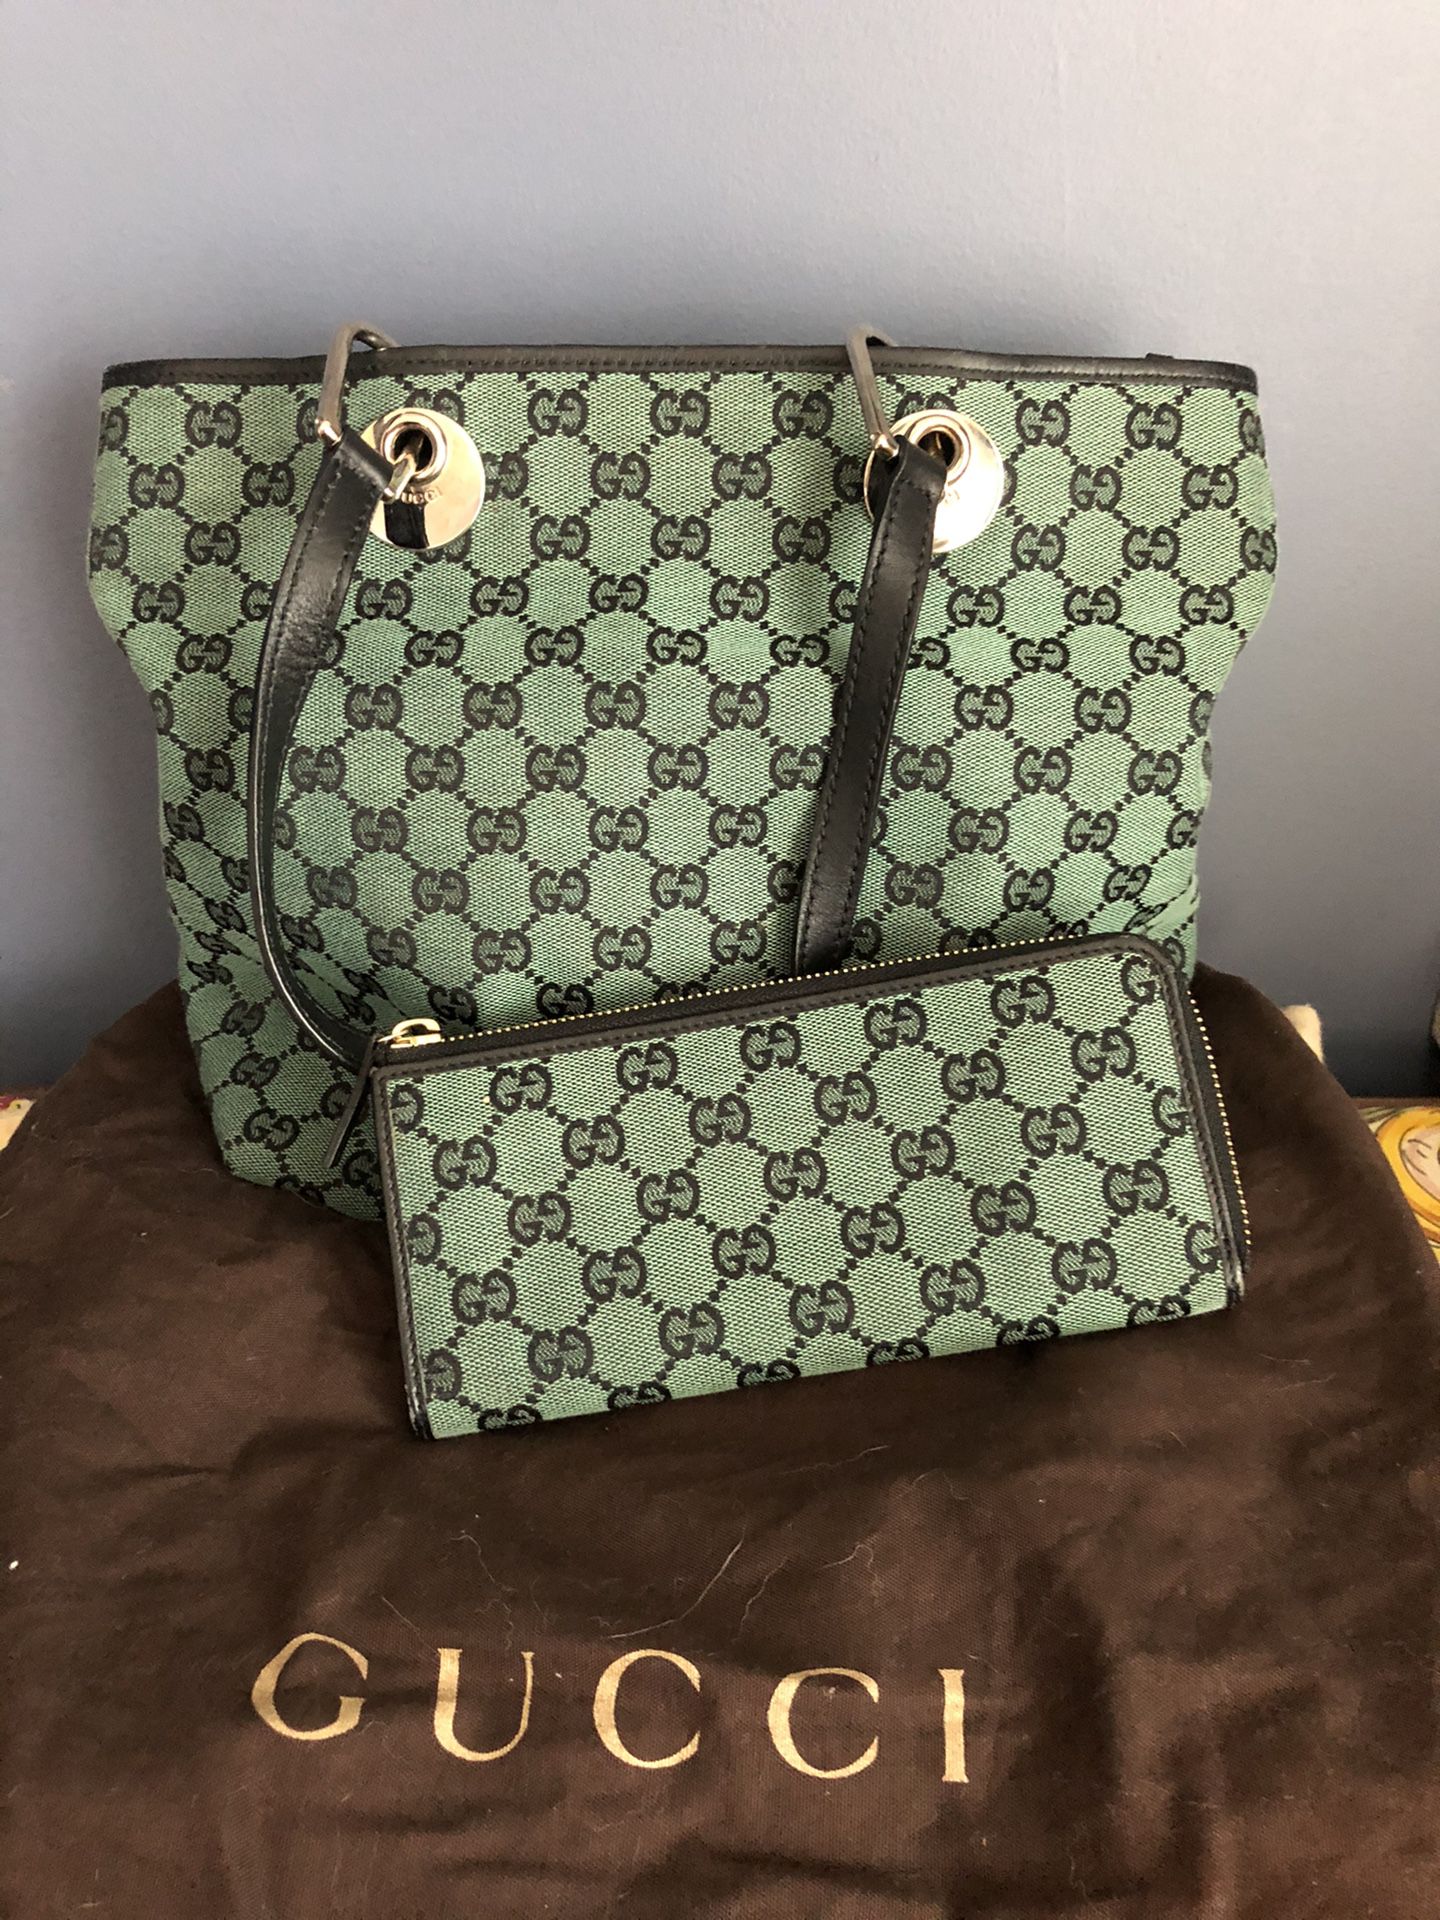 Gucci purse and wallet